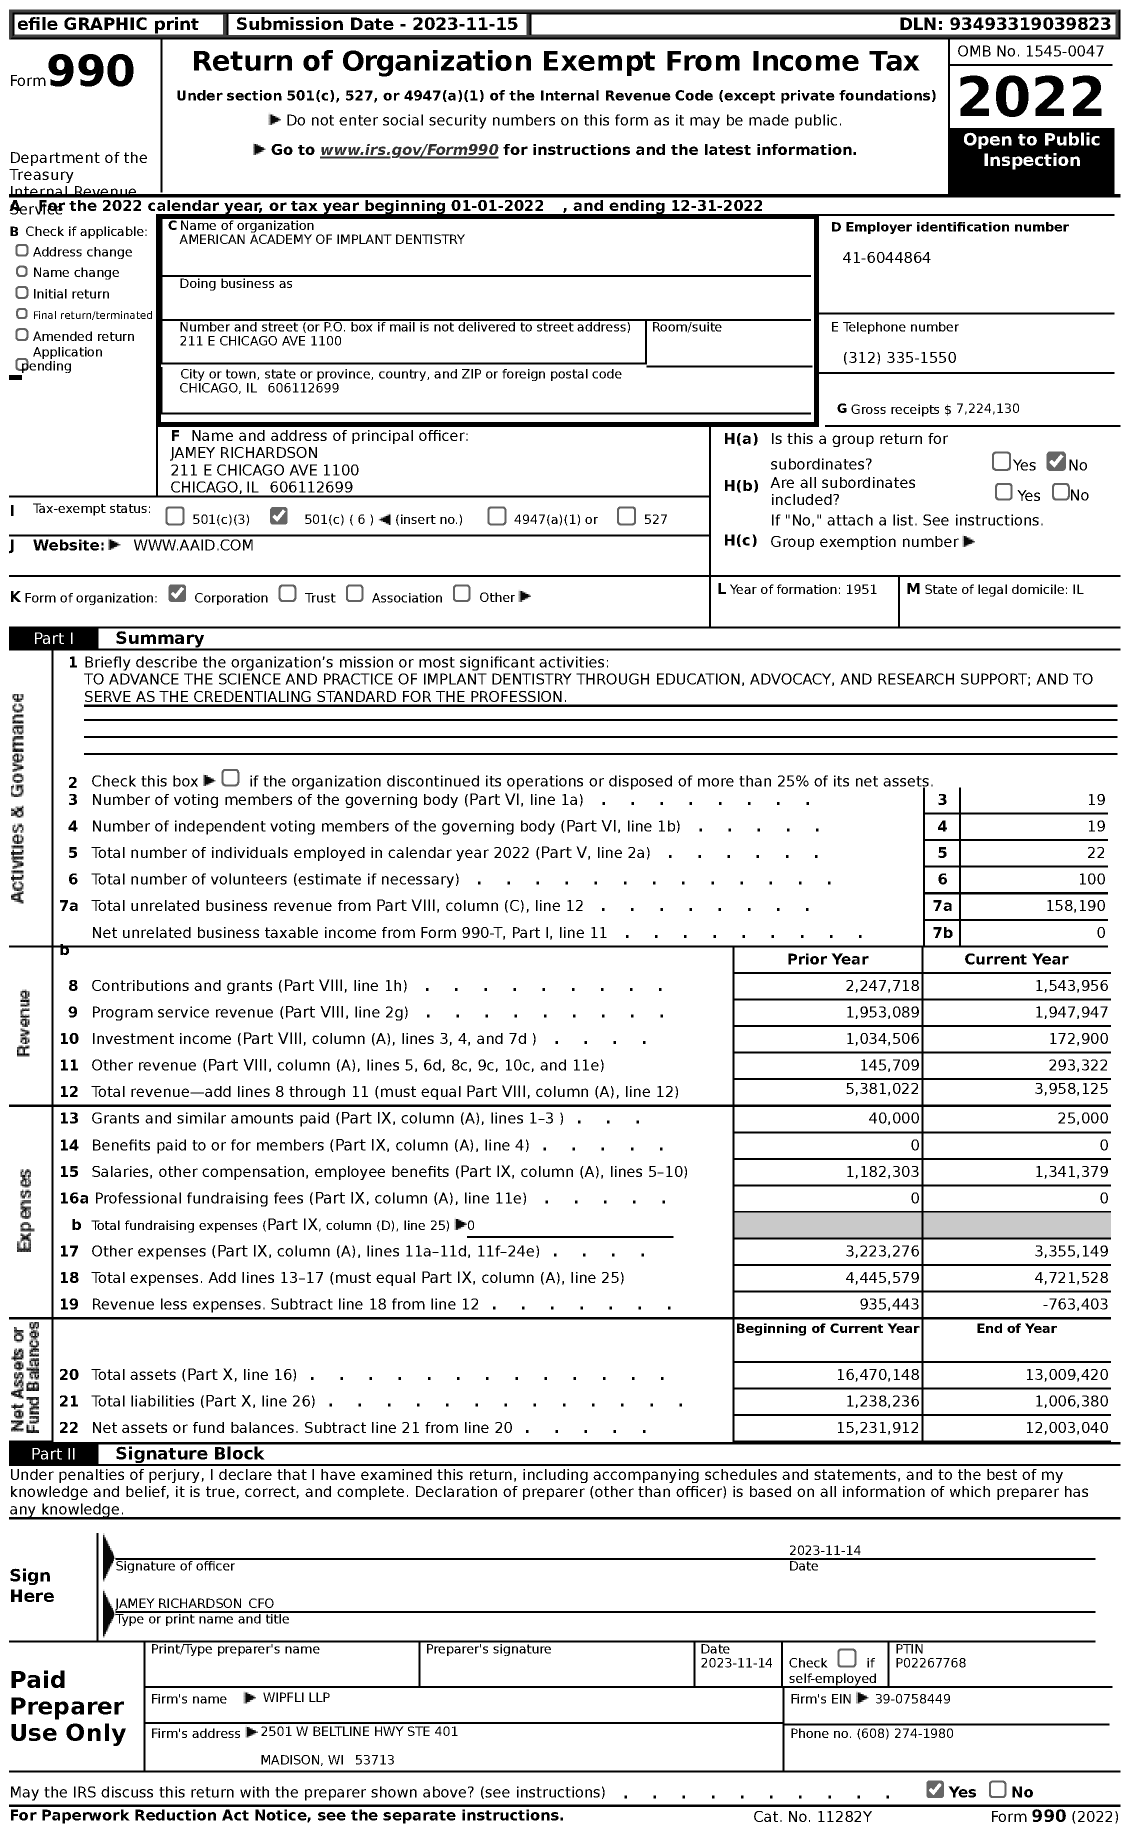 Image of first page of 2022 Form 990 for American Academy of Implant Dentistry (AAID)